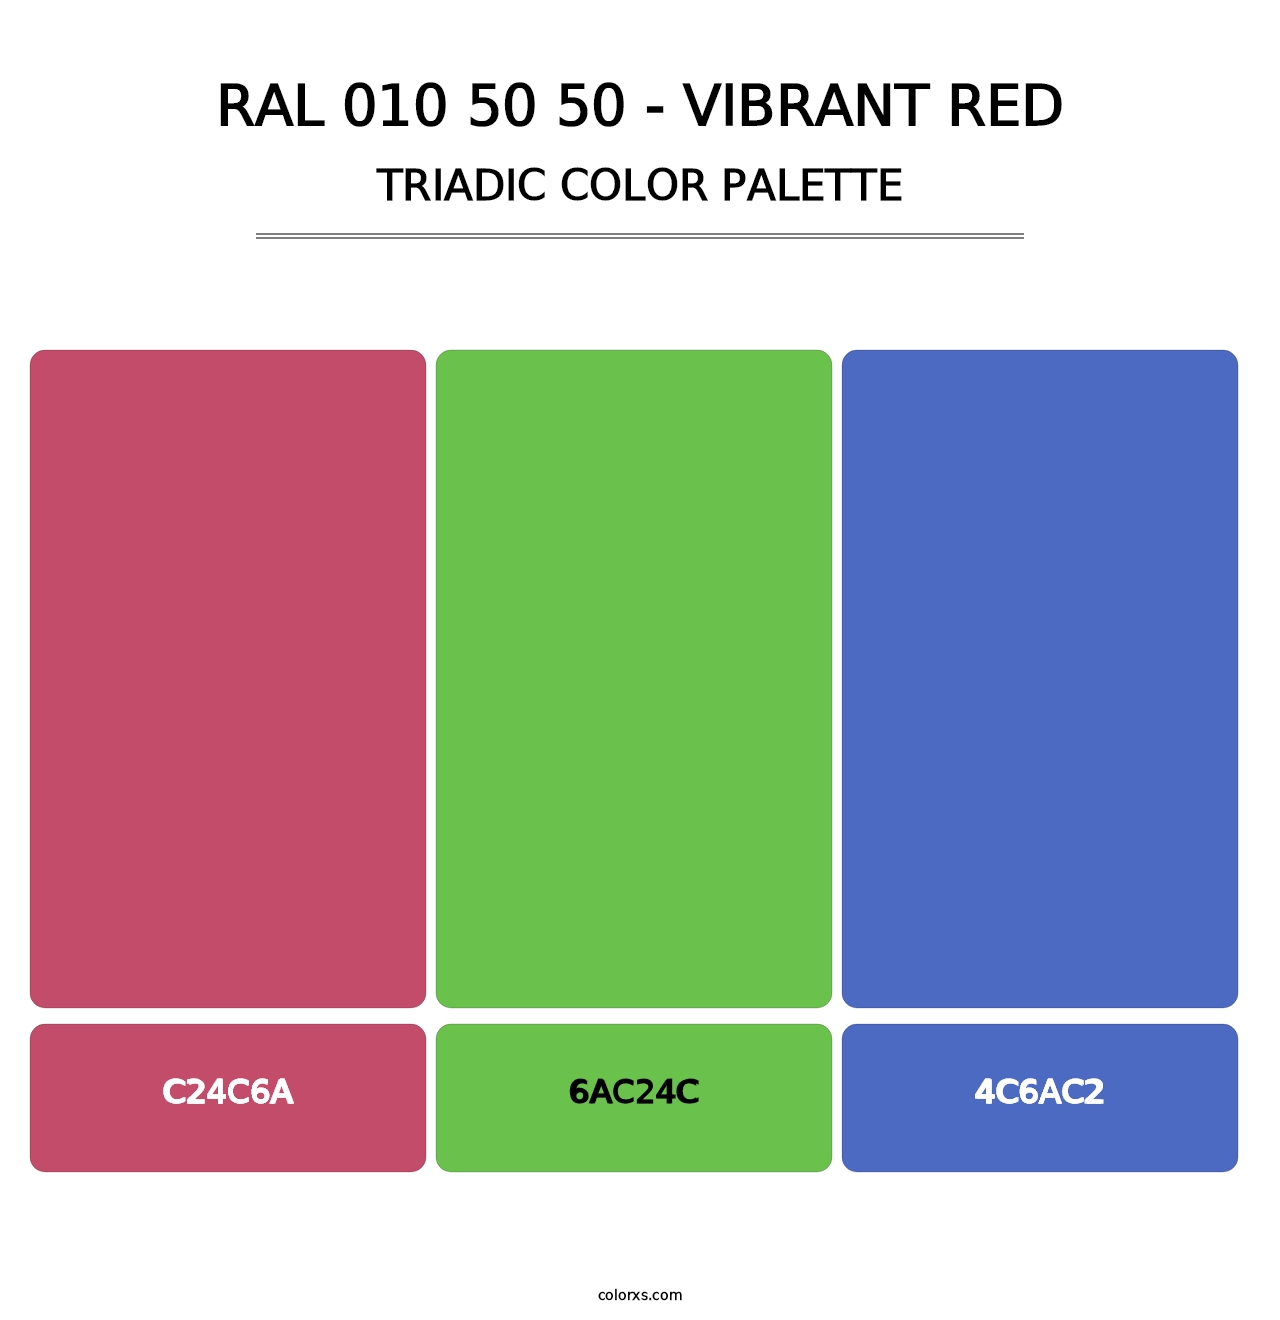 RAL 010 50 50 - Vibrant Red - Triadic Color Palette